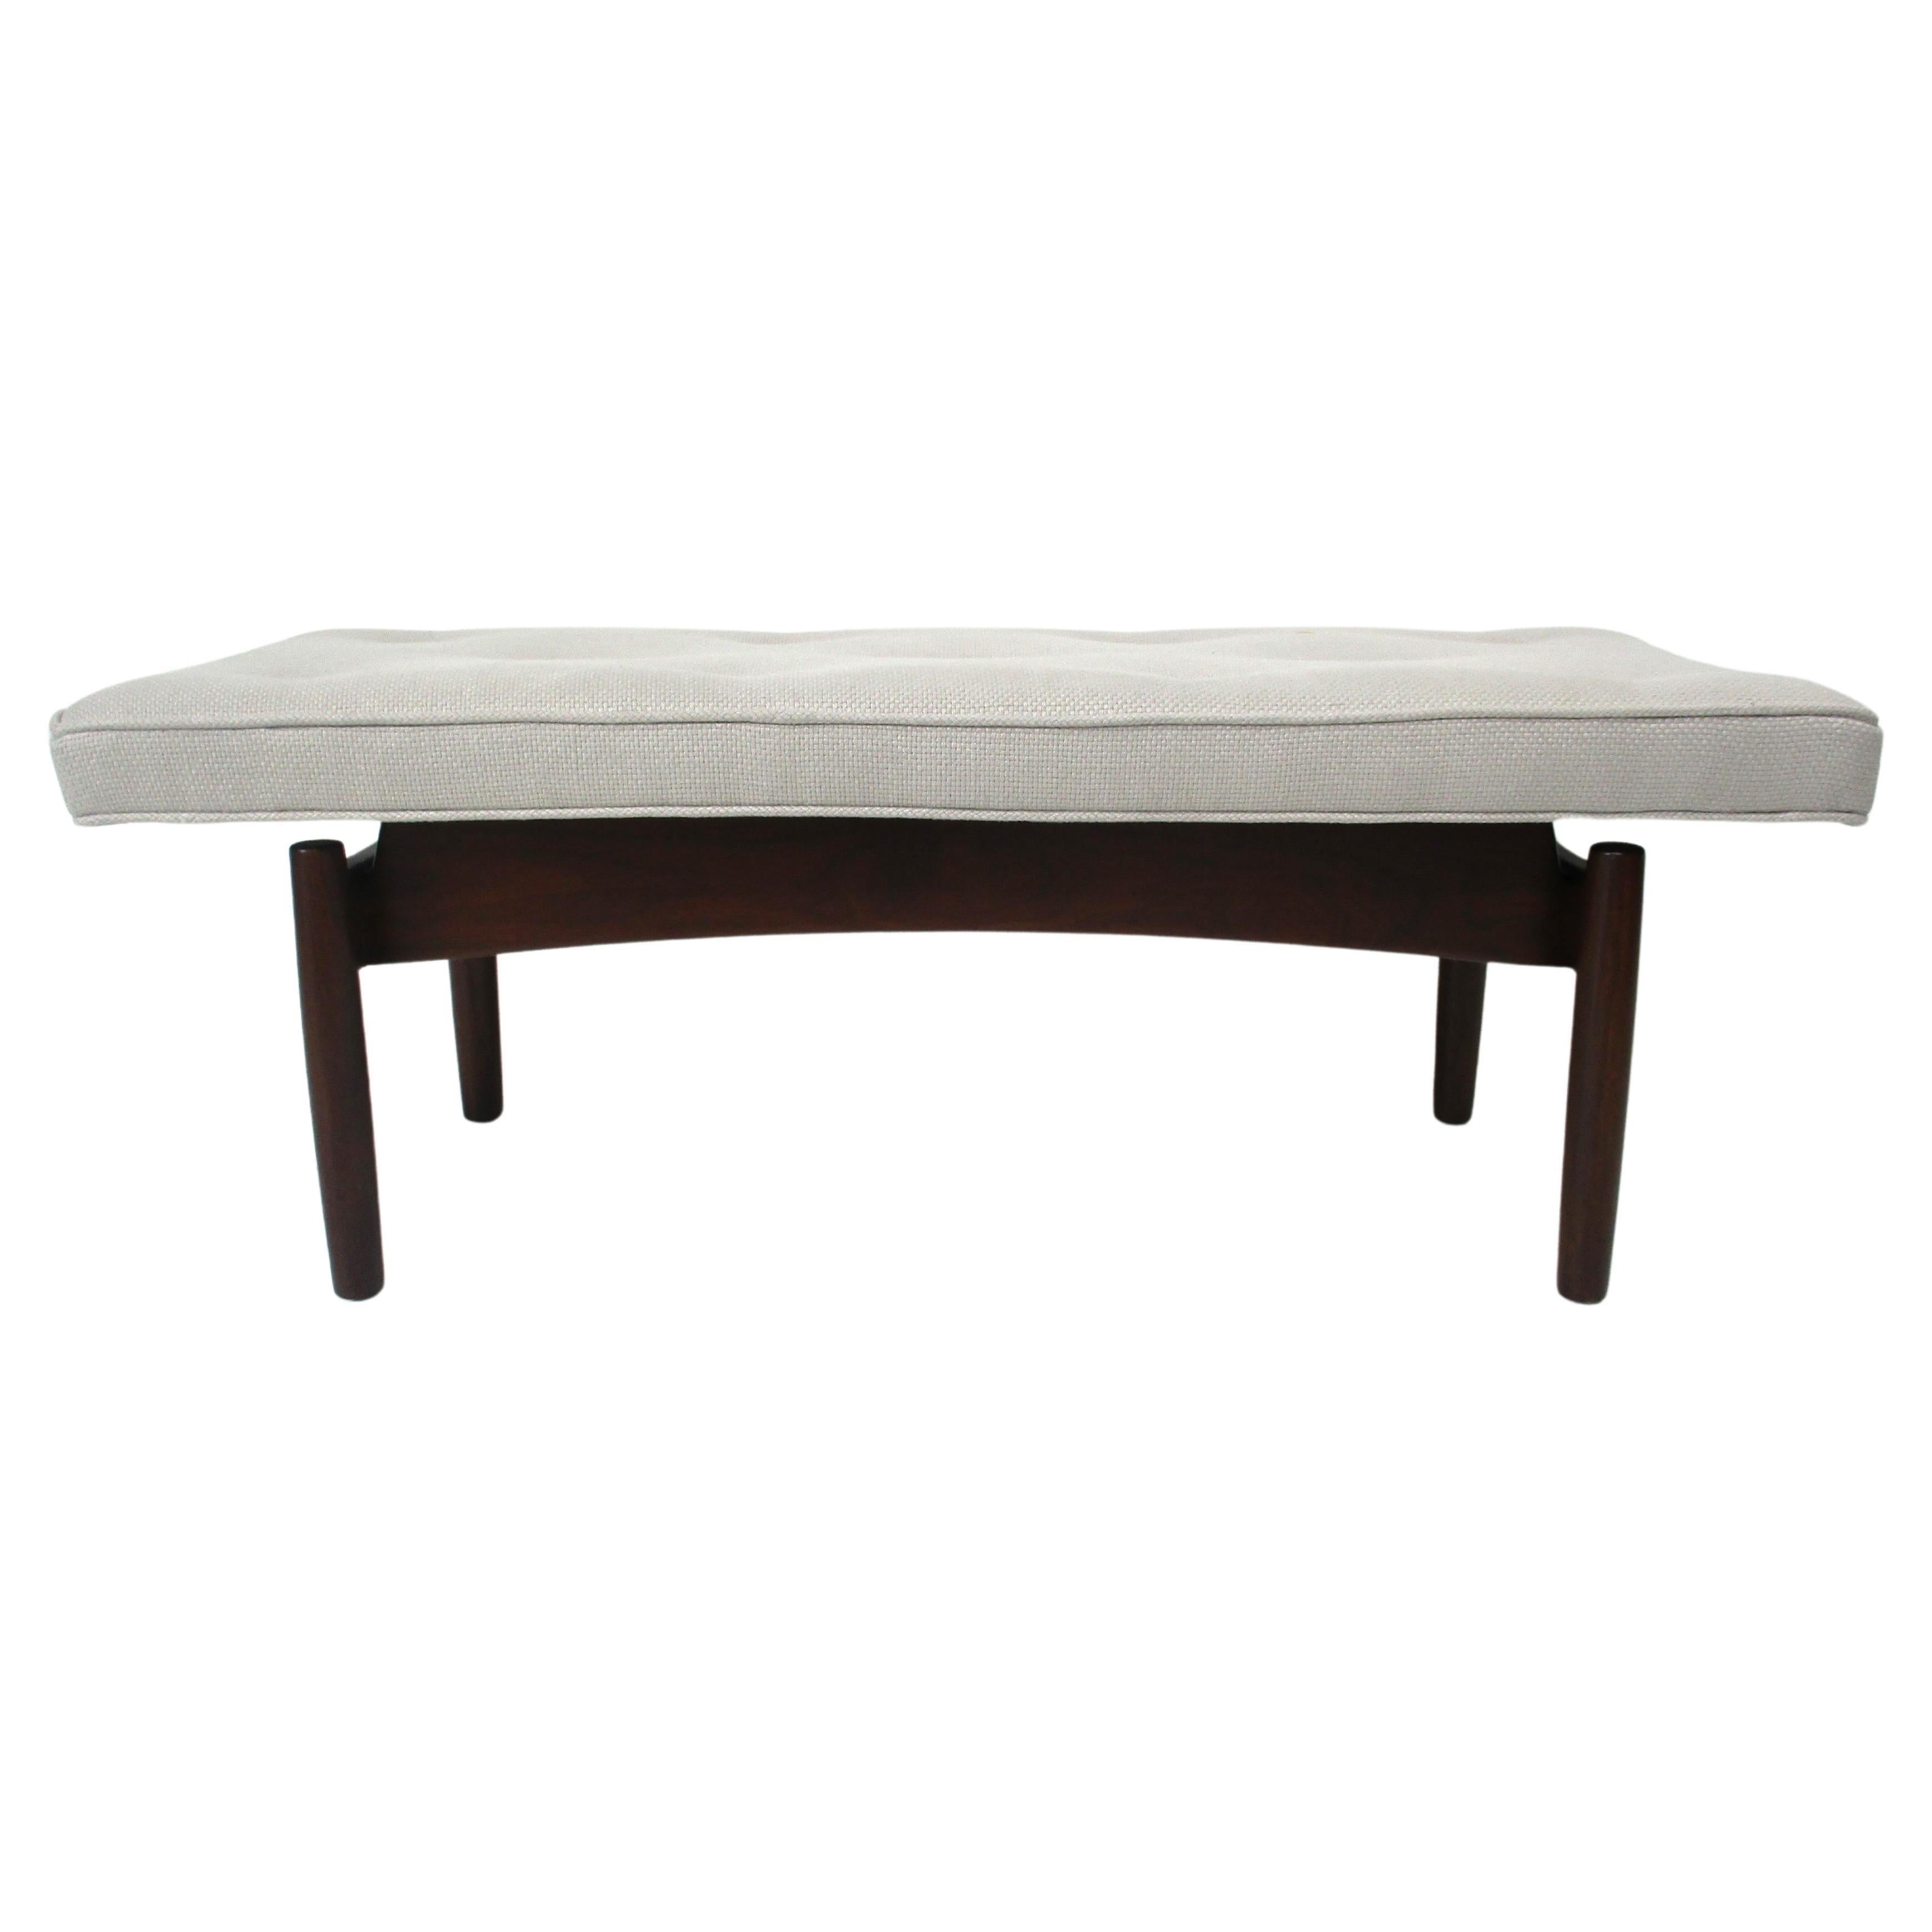 Upholstered Walnut Bench in the Style of Greta Grossman Danish Modern (A) For Sale